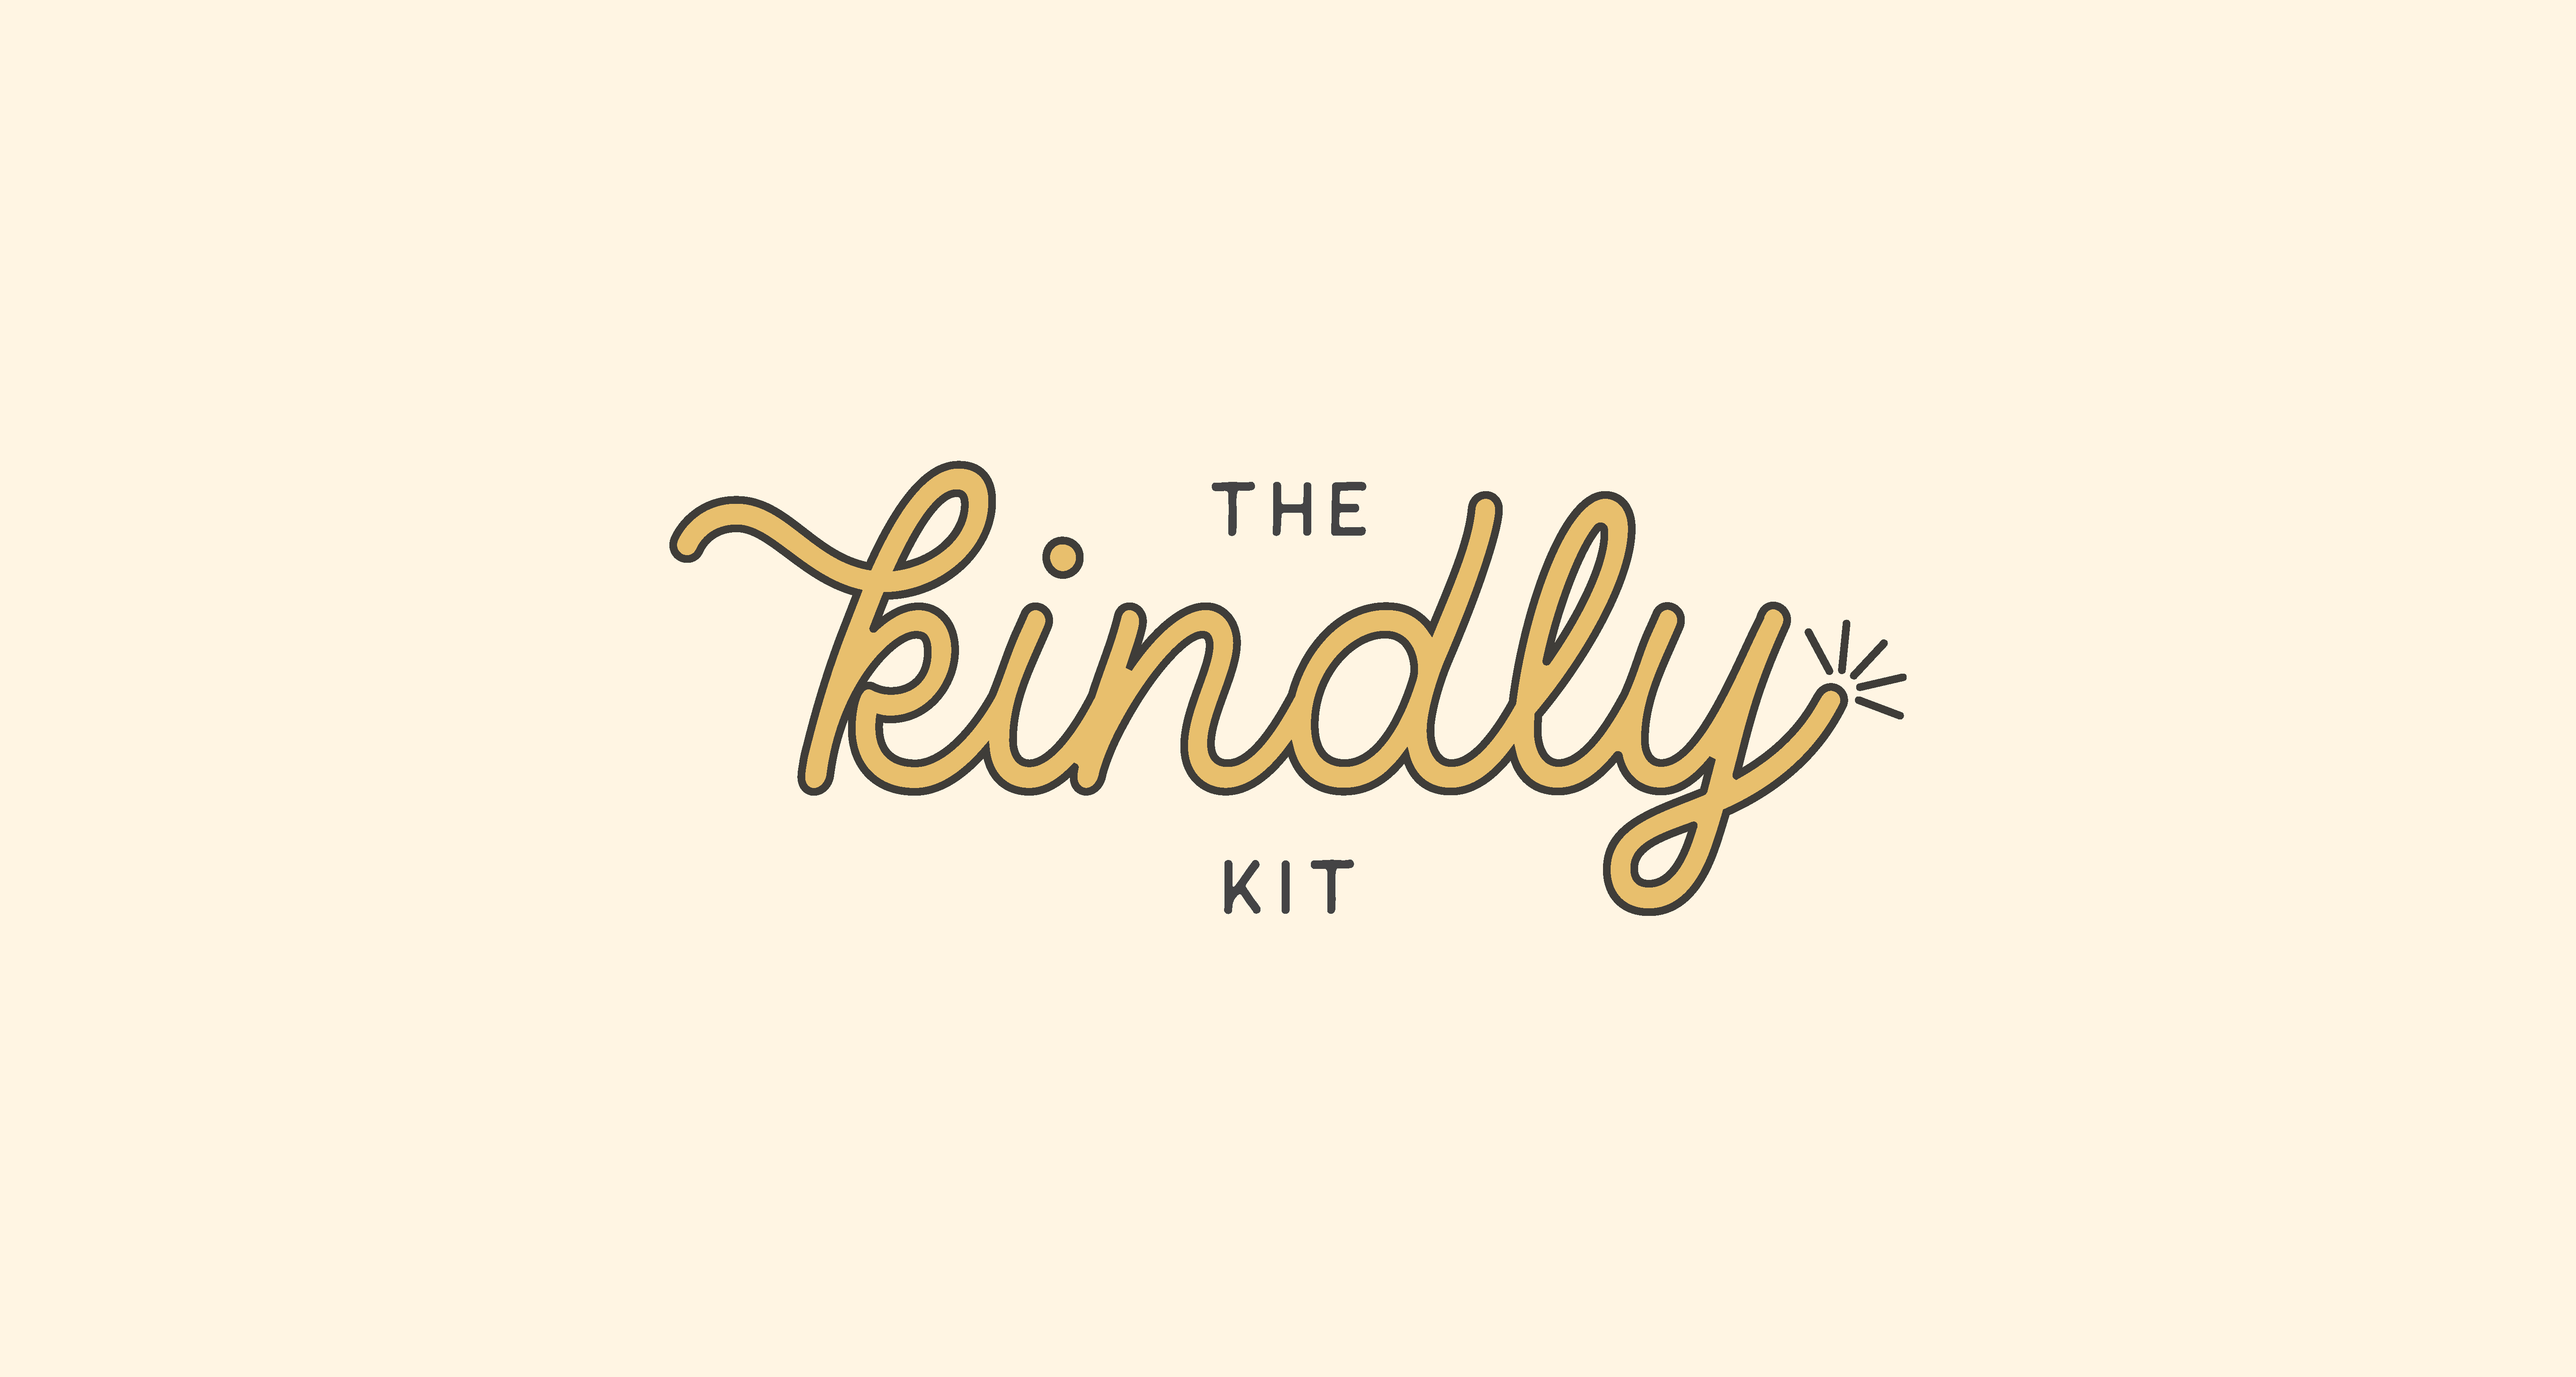 The Kindly Kit Resources for Designers